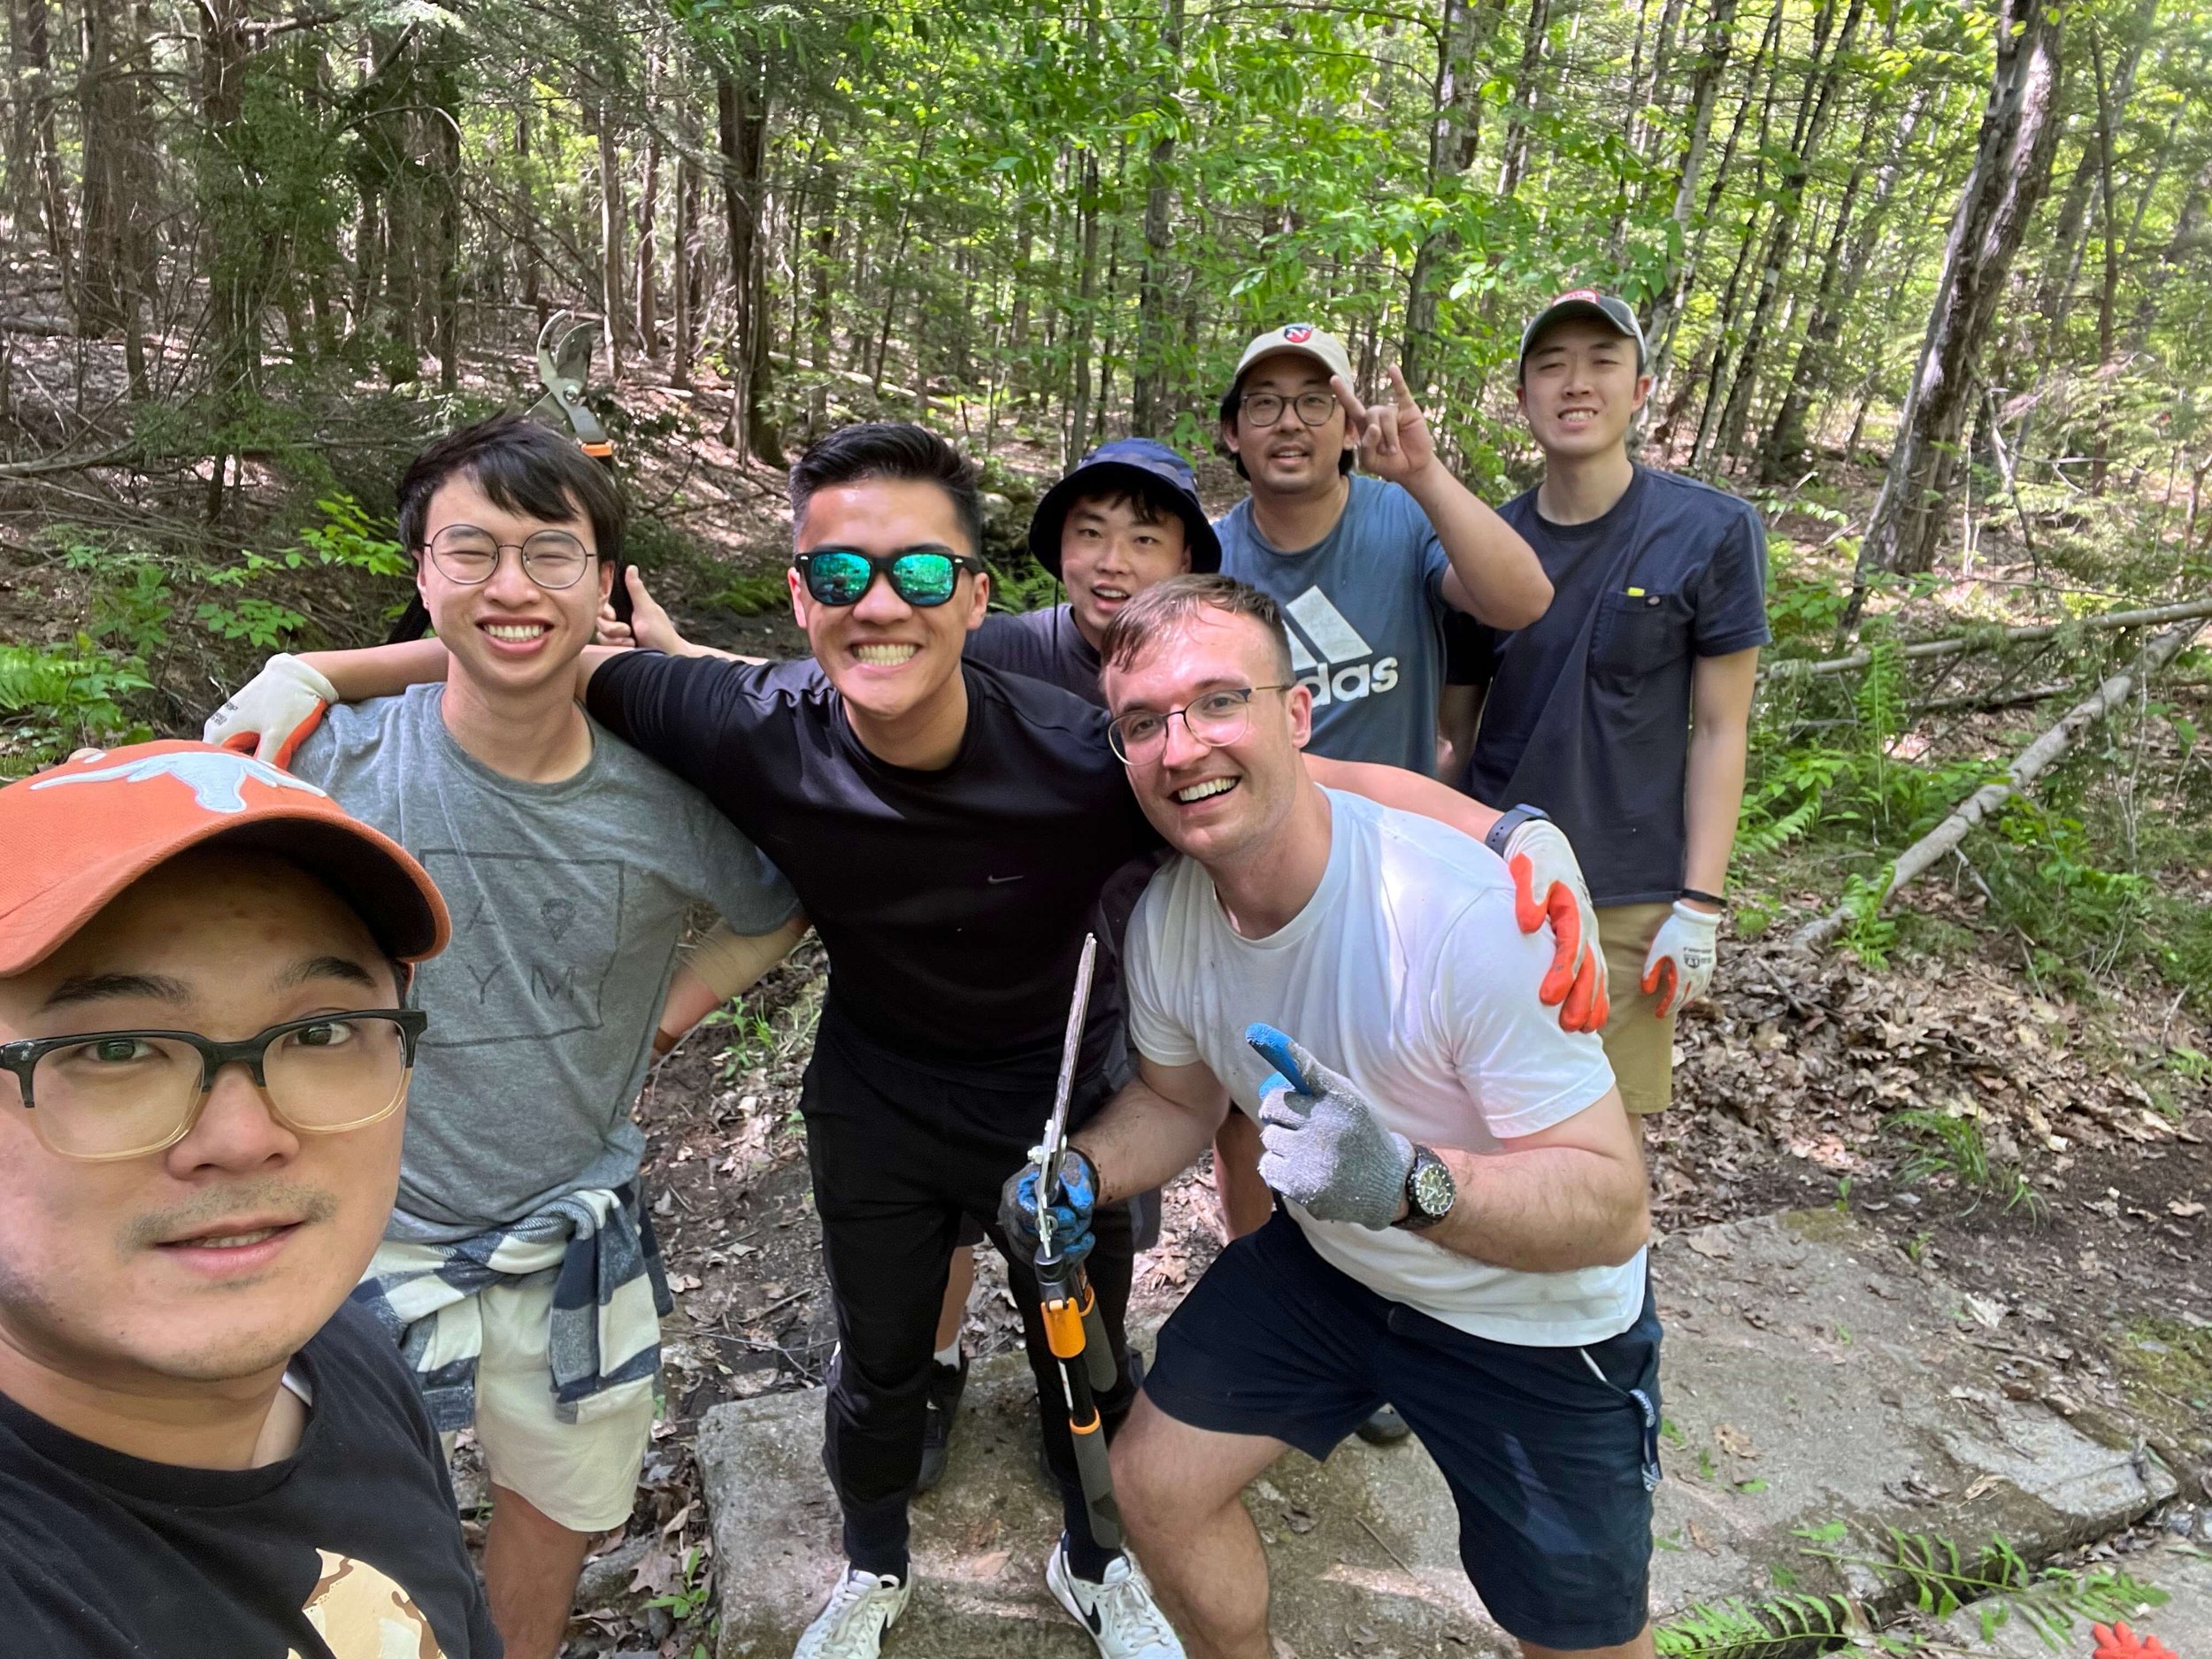 Charlie on a hike with some of his friends from Reclaimer College Church in Massachusetts